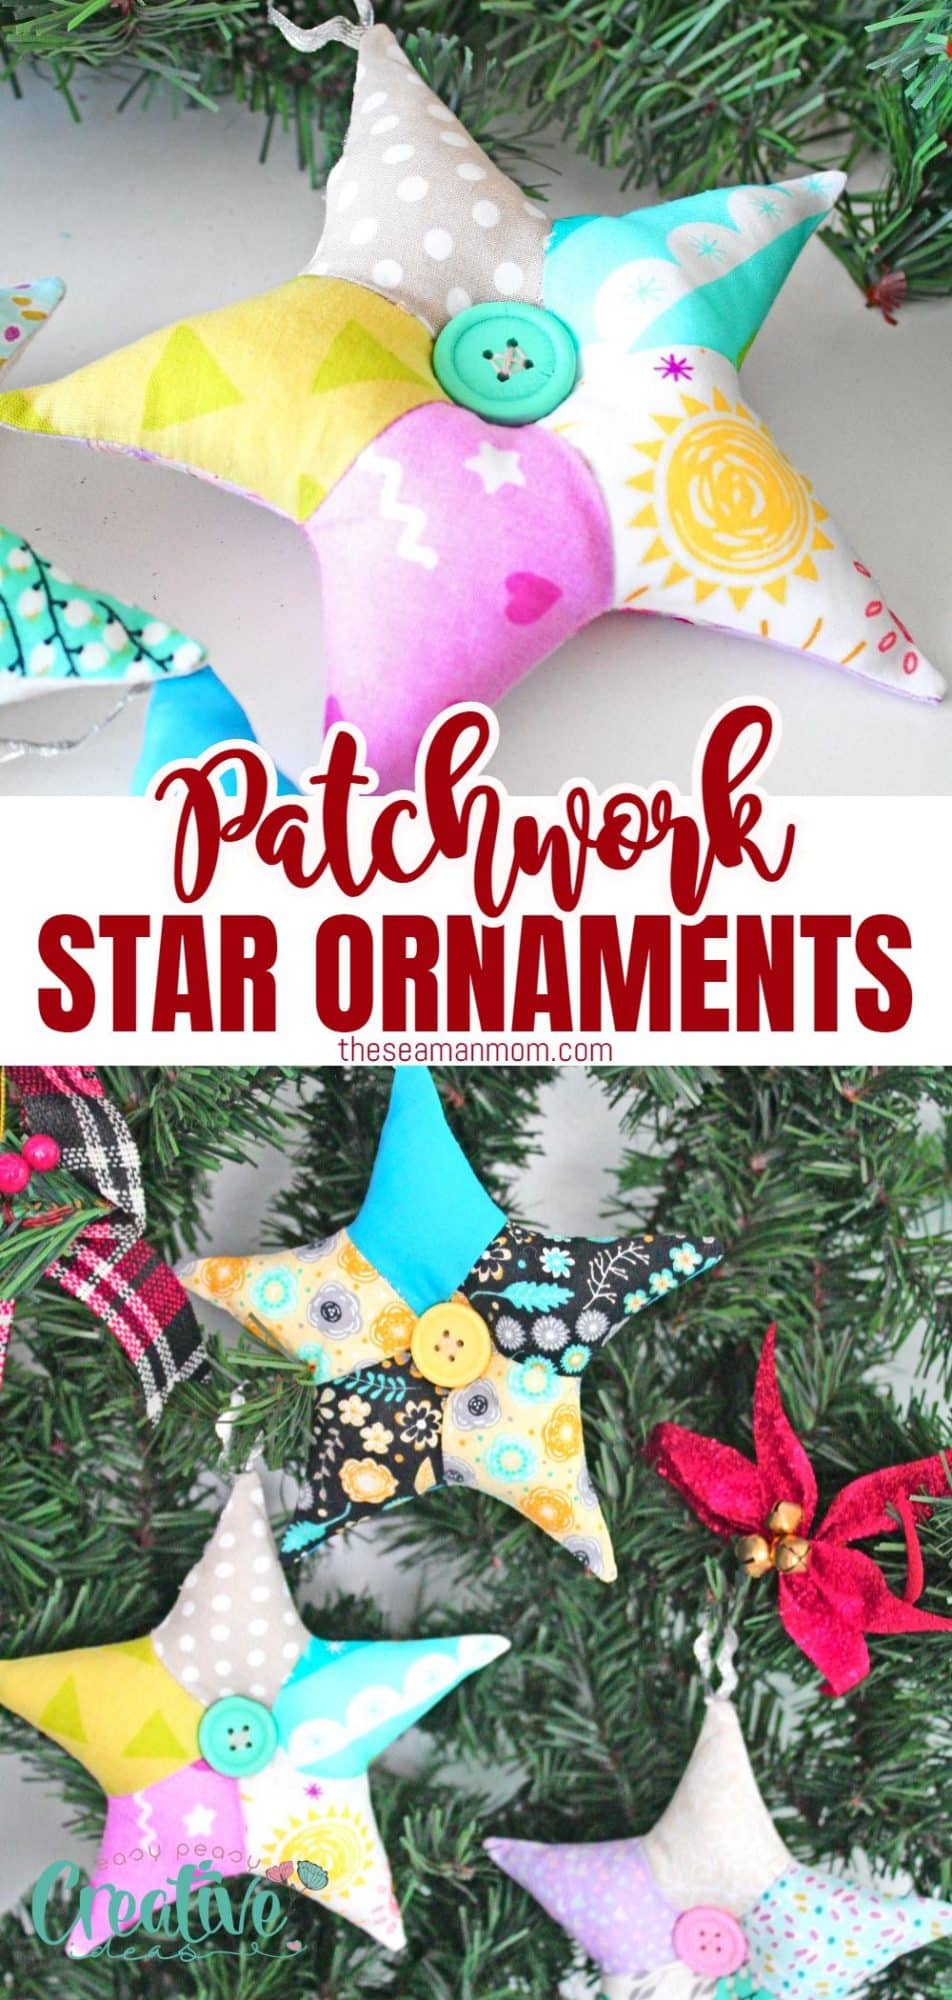 Photo collage of patchwork star ornaments